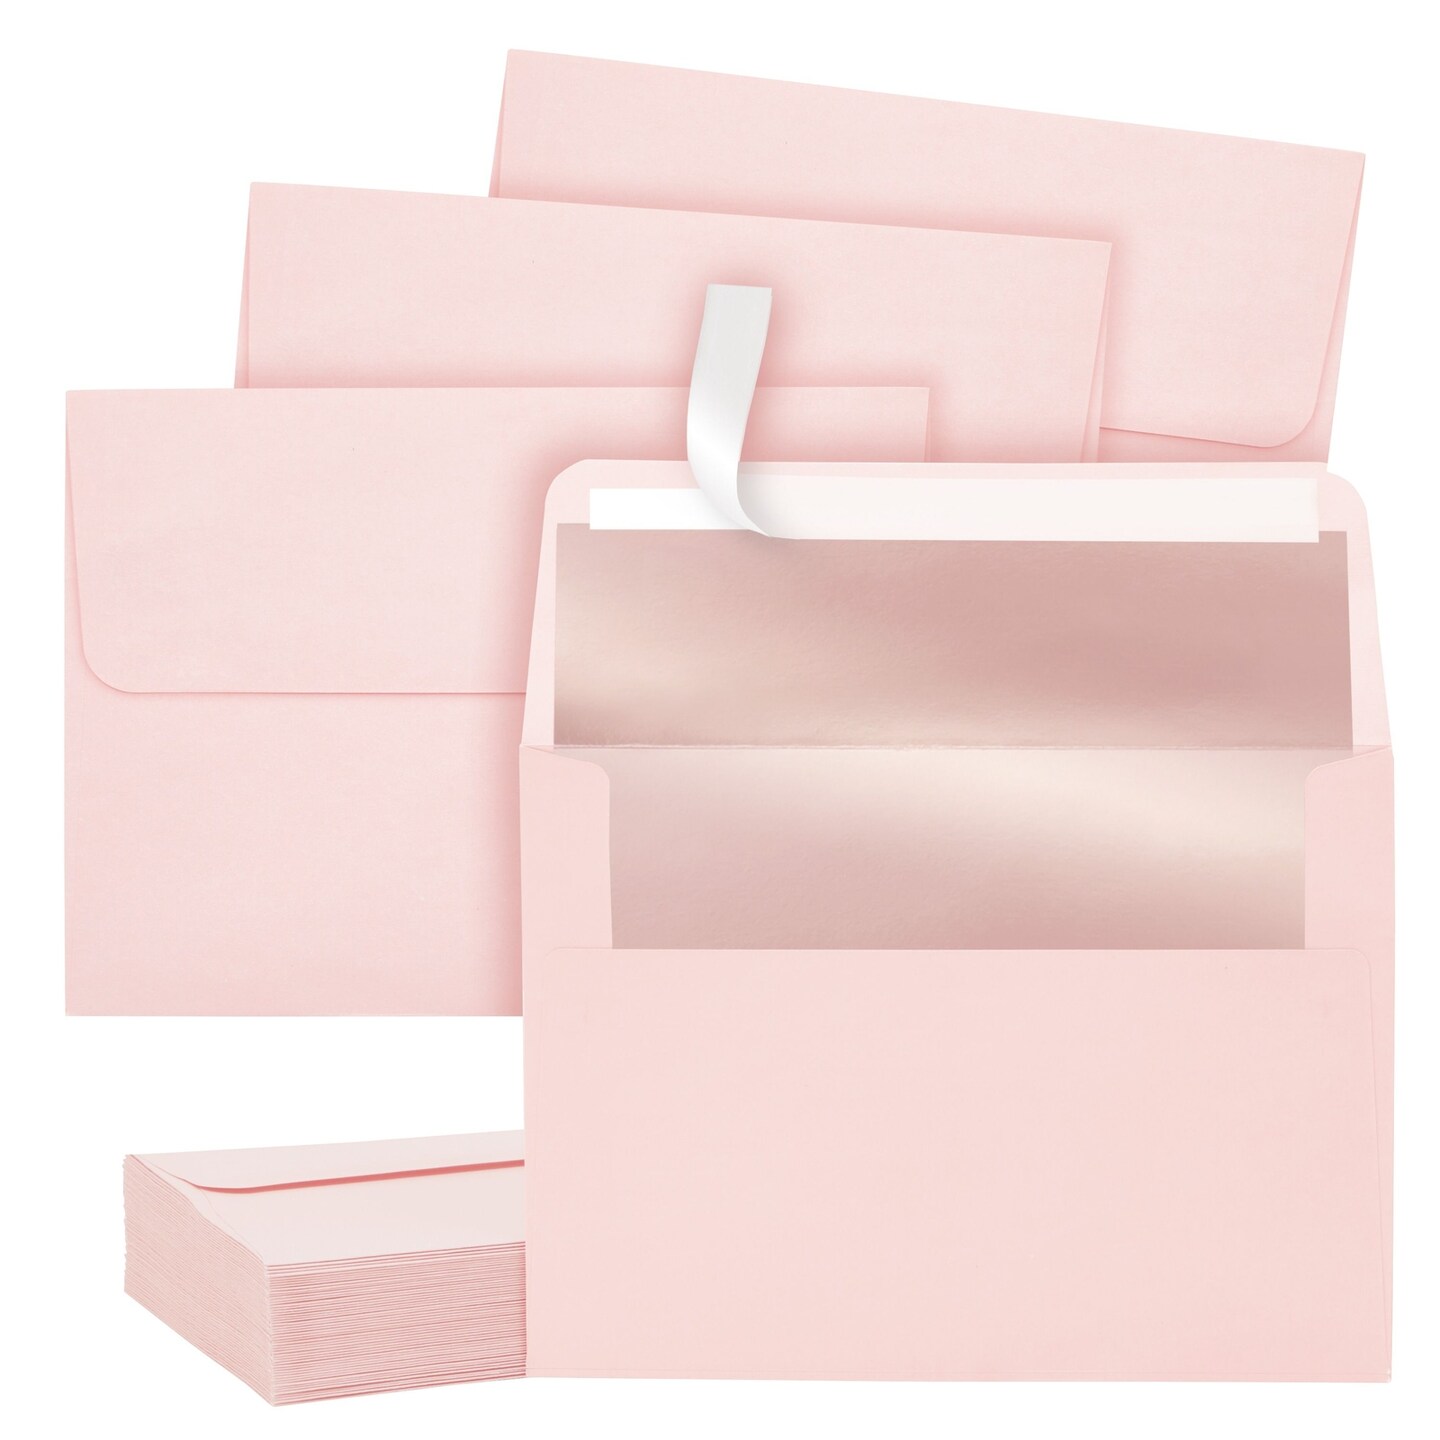 Discount A7 Envelopes for enclosing your 5x7 invitations and cards